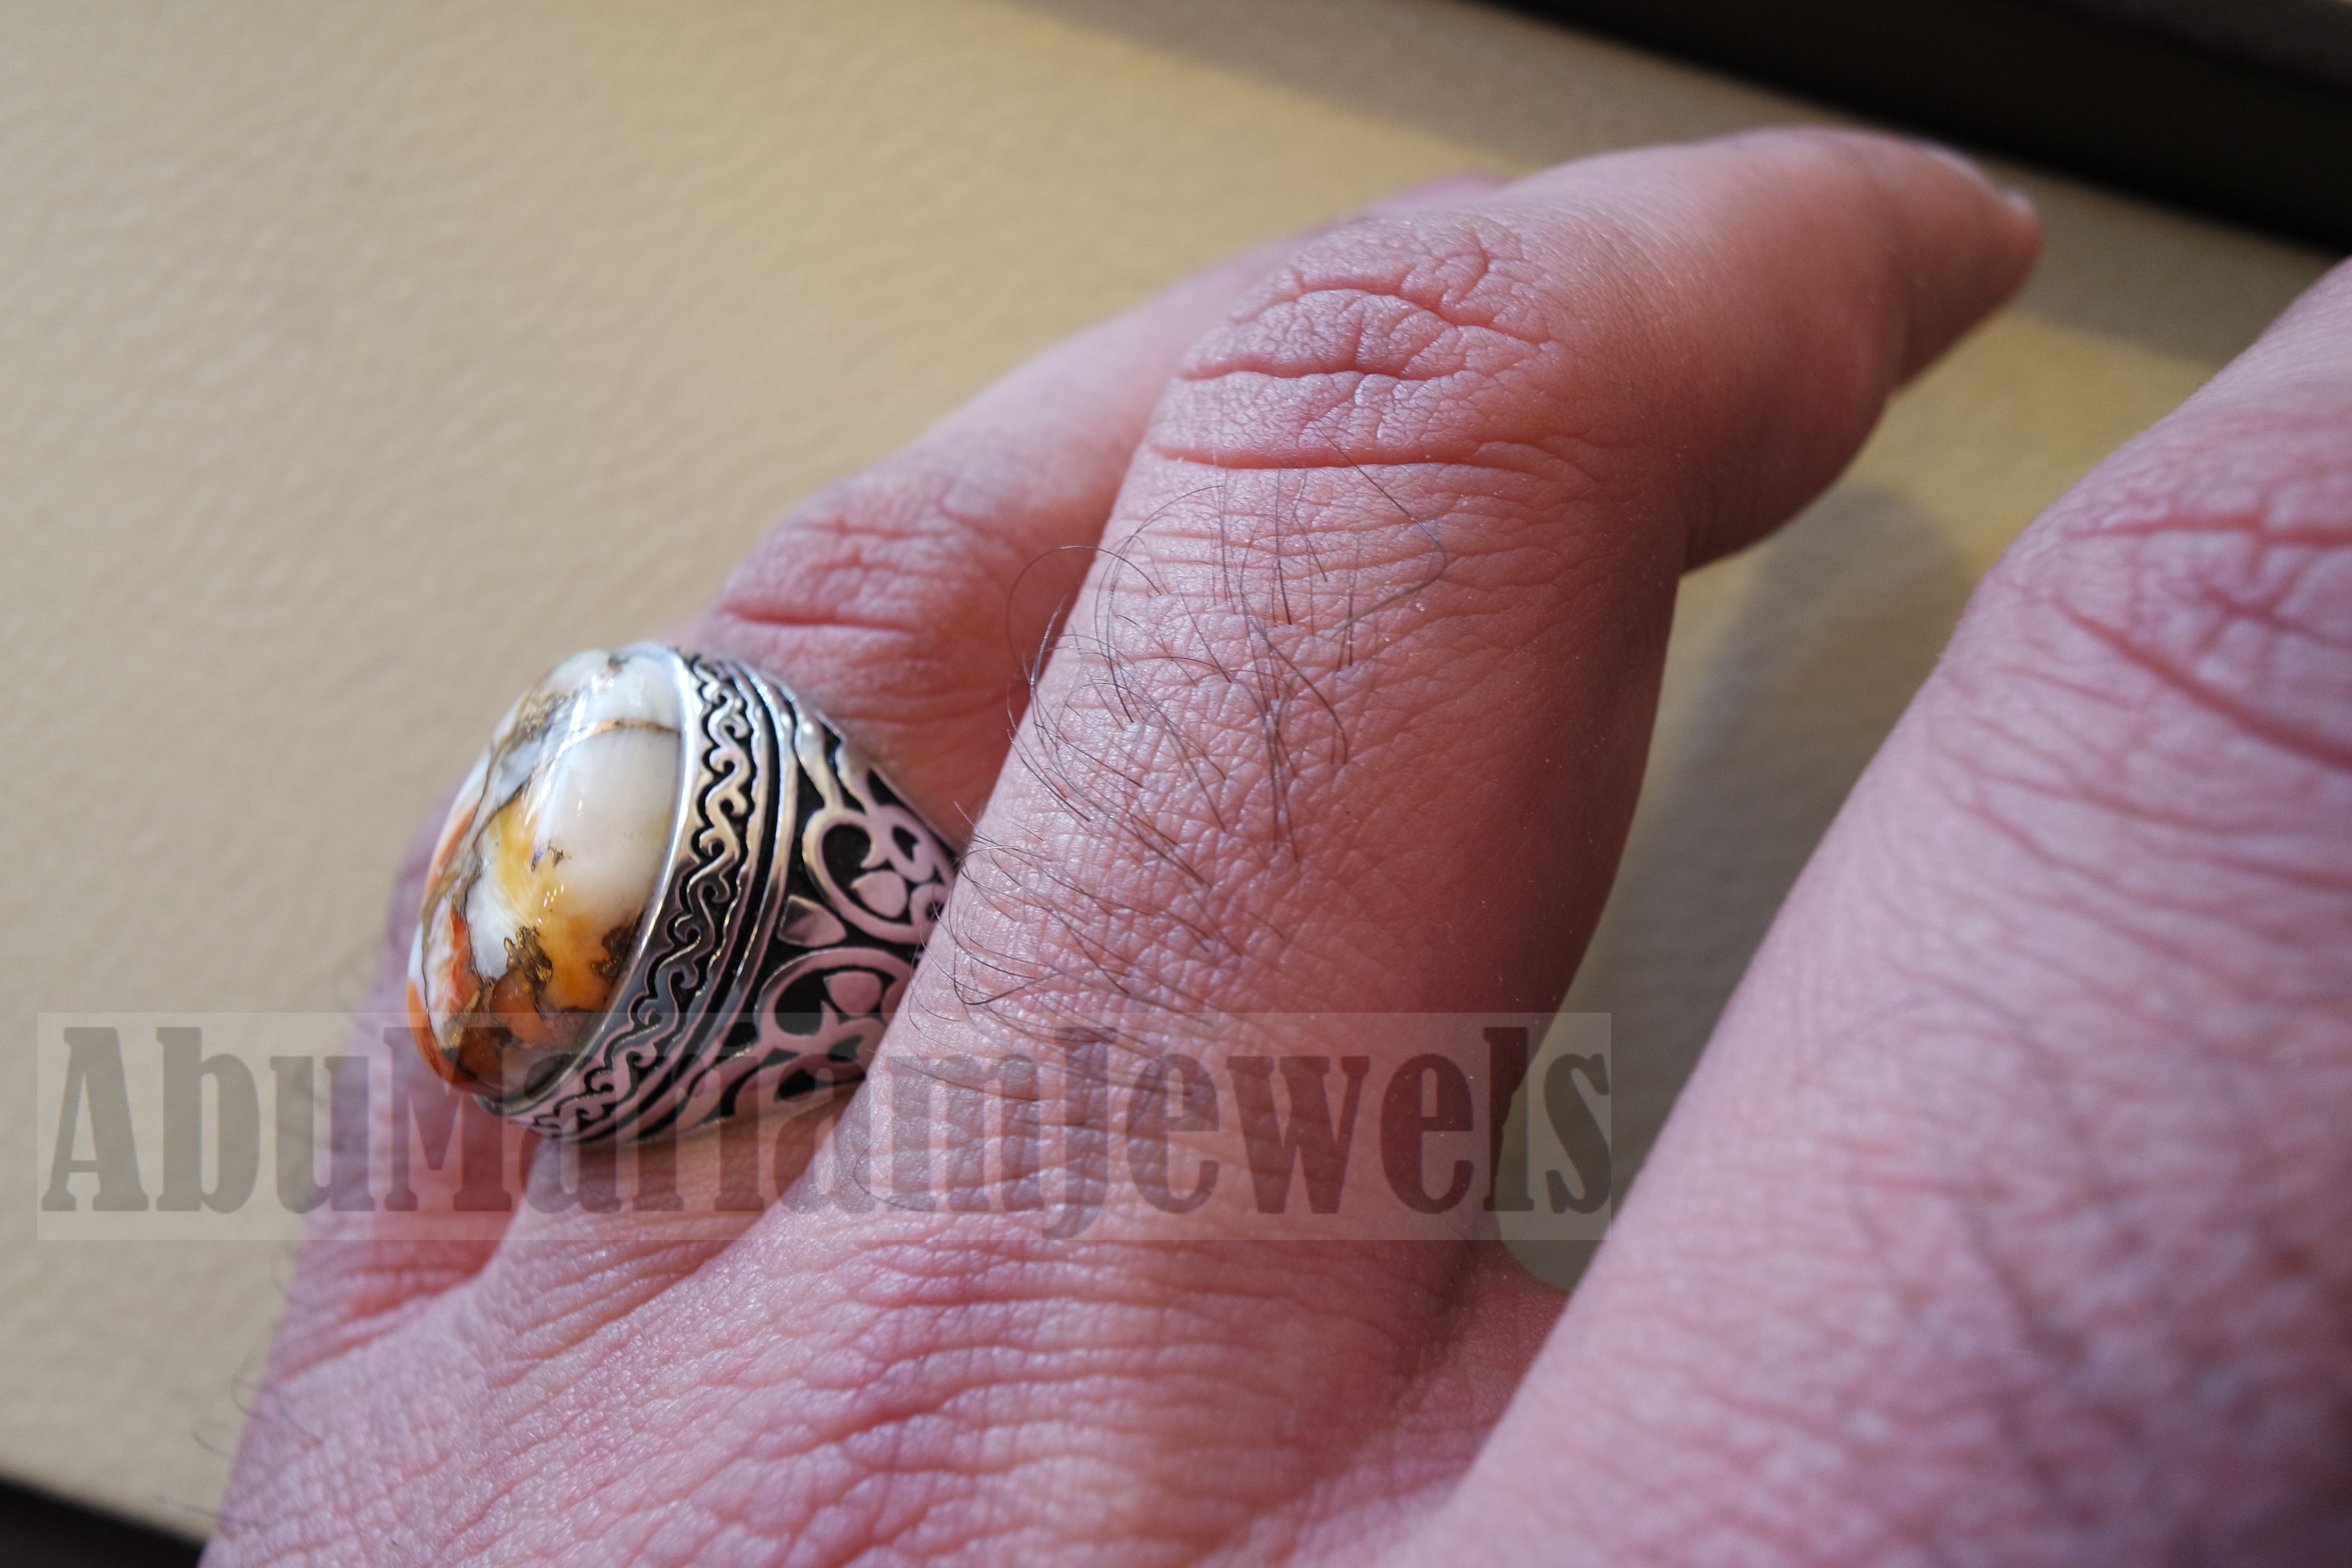 copper oyster man ring natural stone sterling silver 925 oval cabochon semi precious gem ottoman arabic style all sizes jewelry